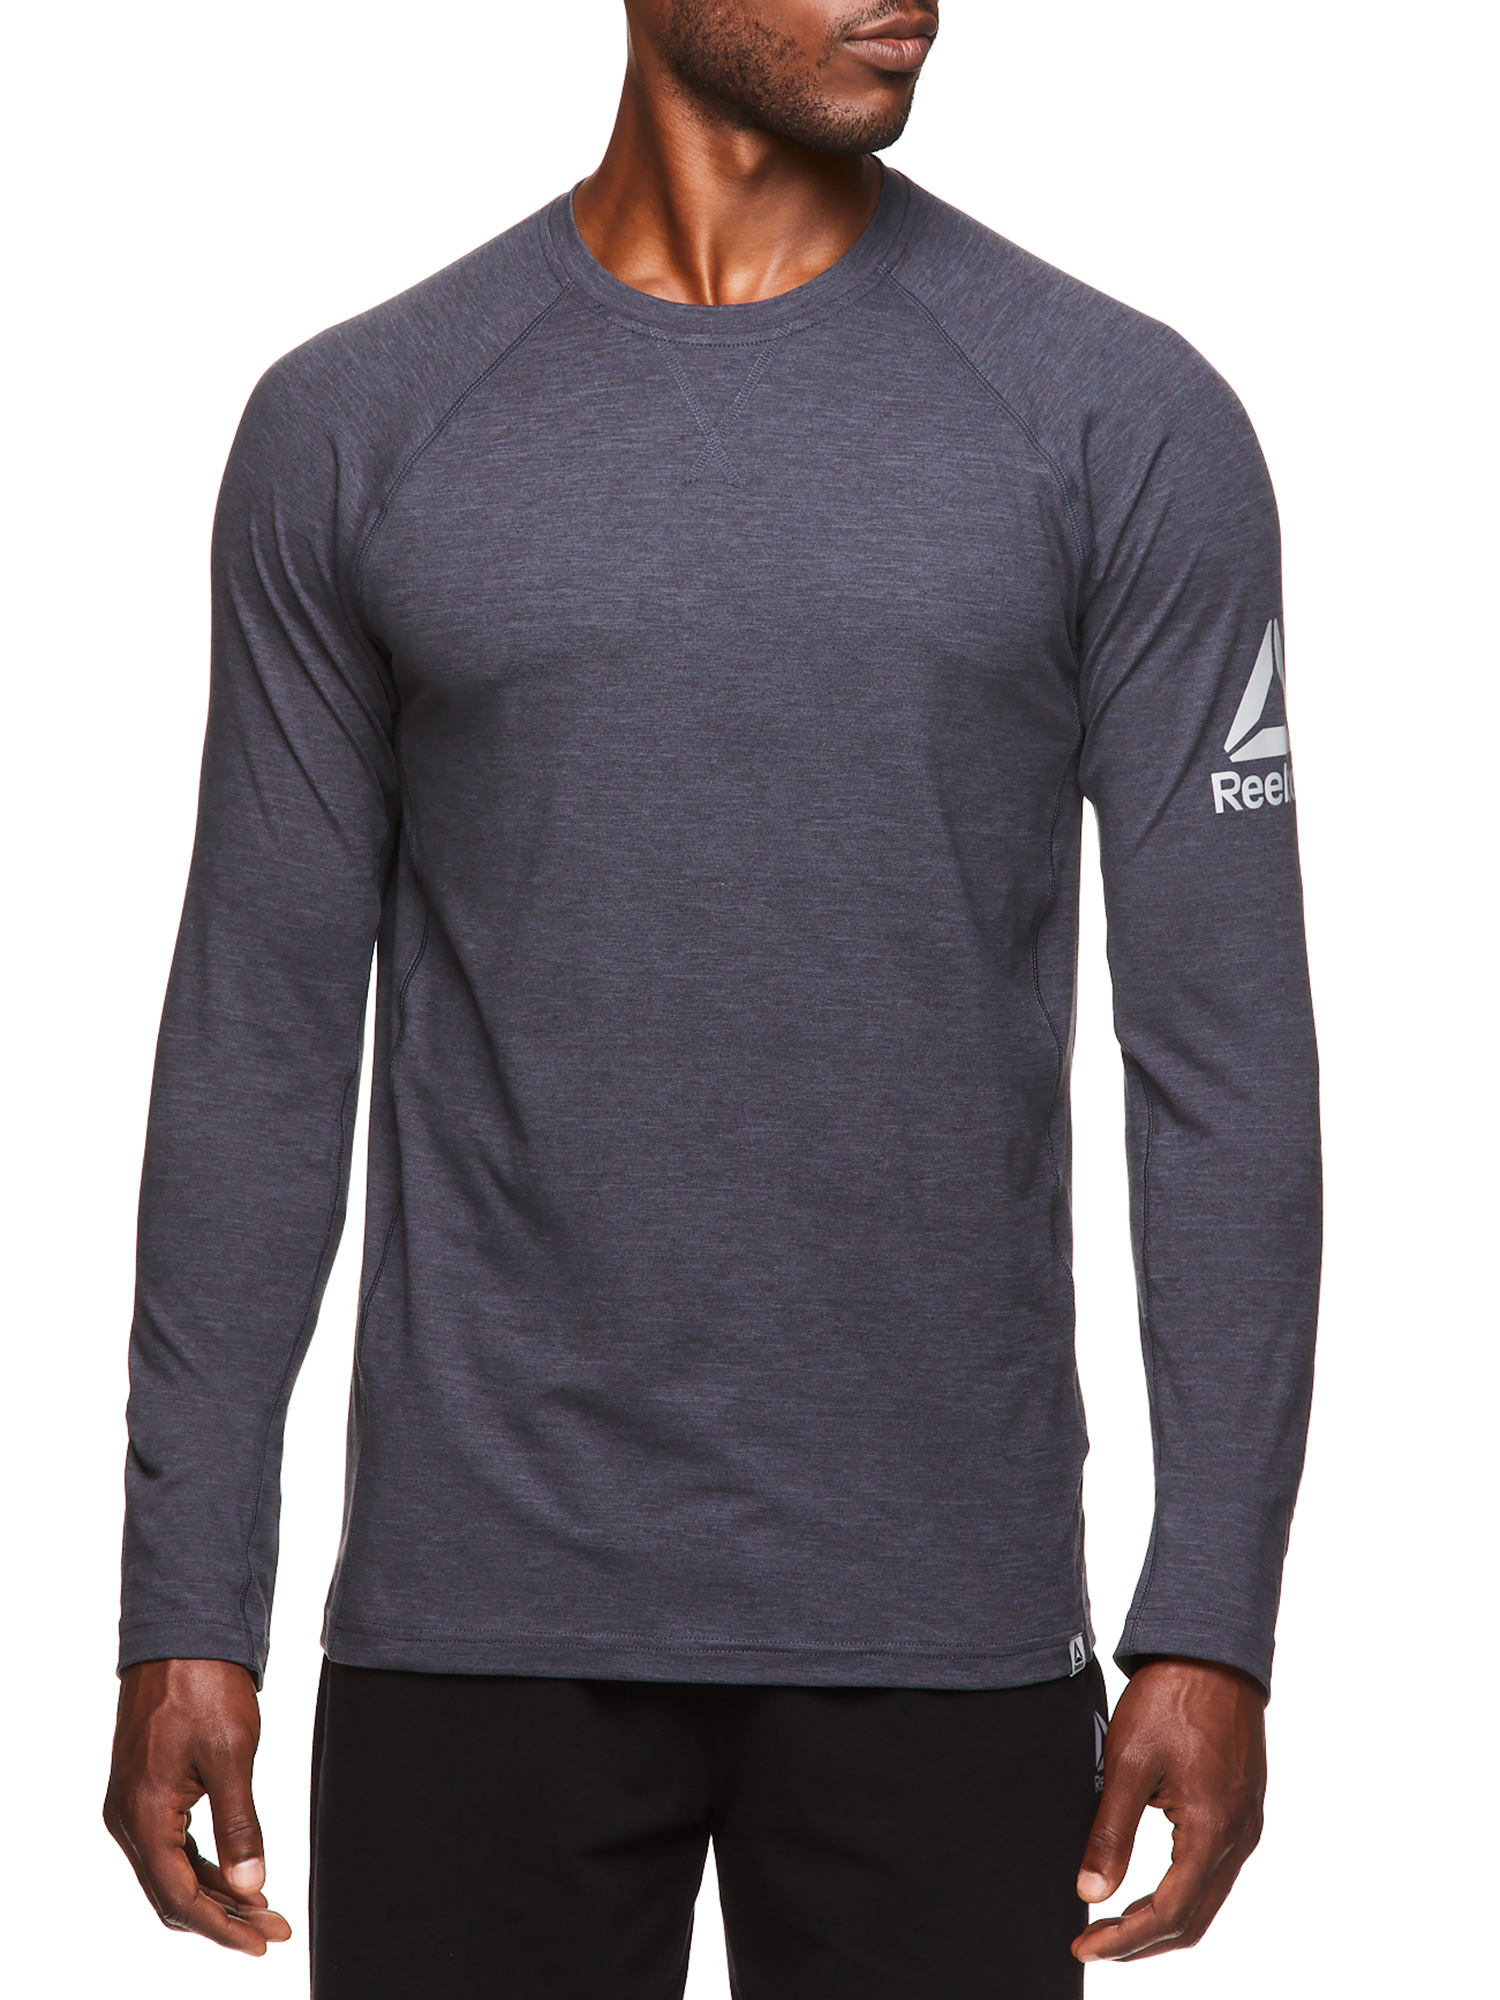 Reebok Men's and Big Men's Active Long Sleeve Warm-Up Training Crew, up to Size 3XL - image 1 of 4